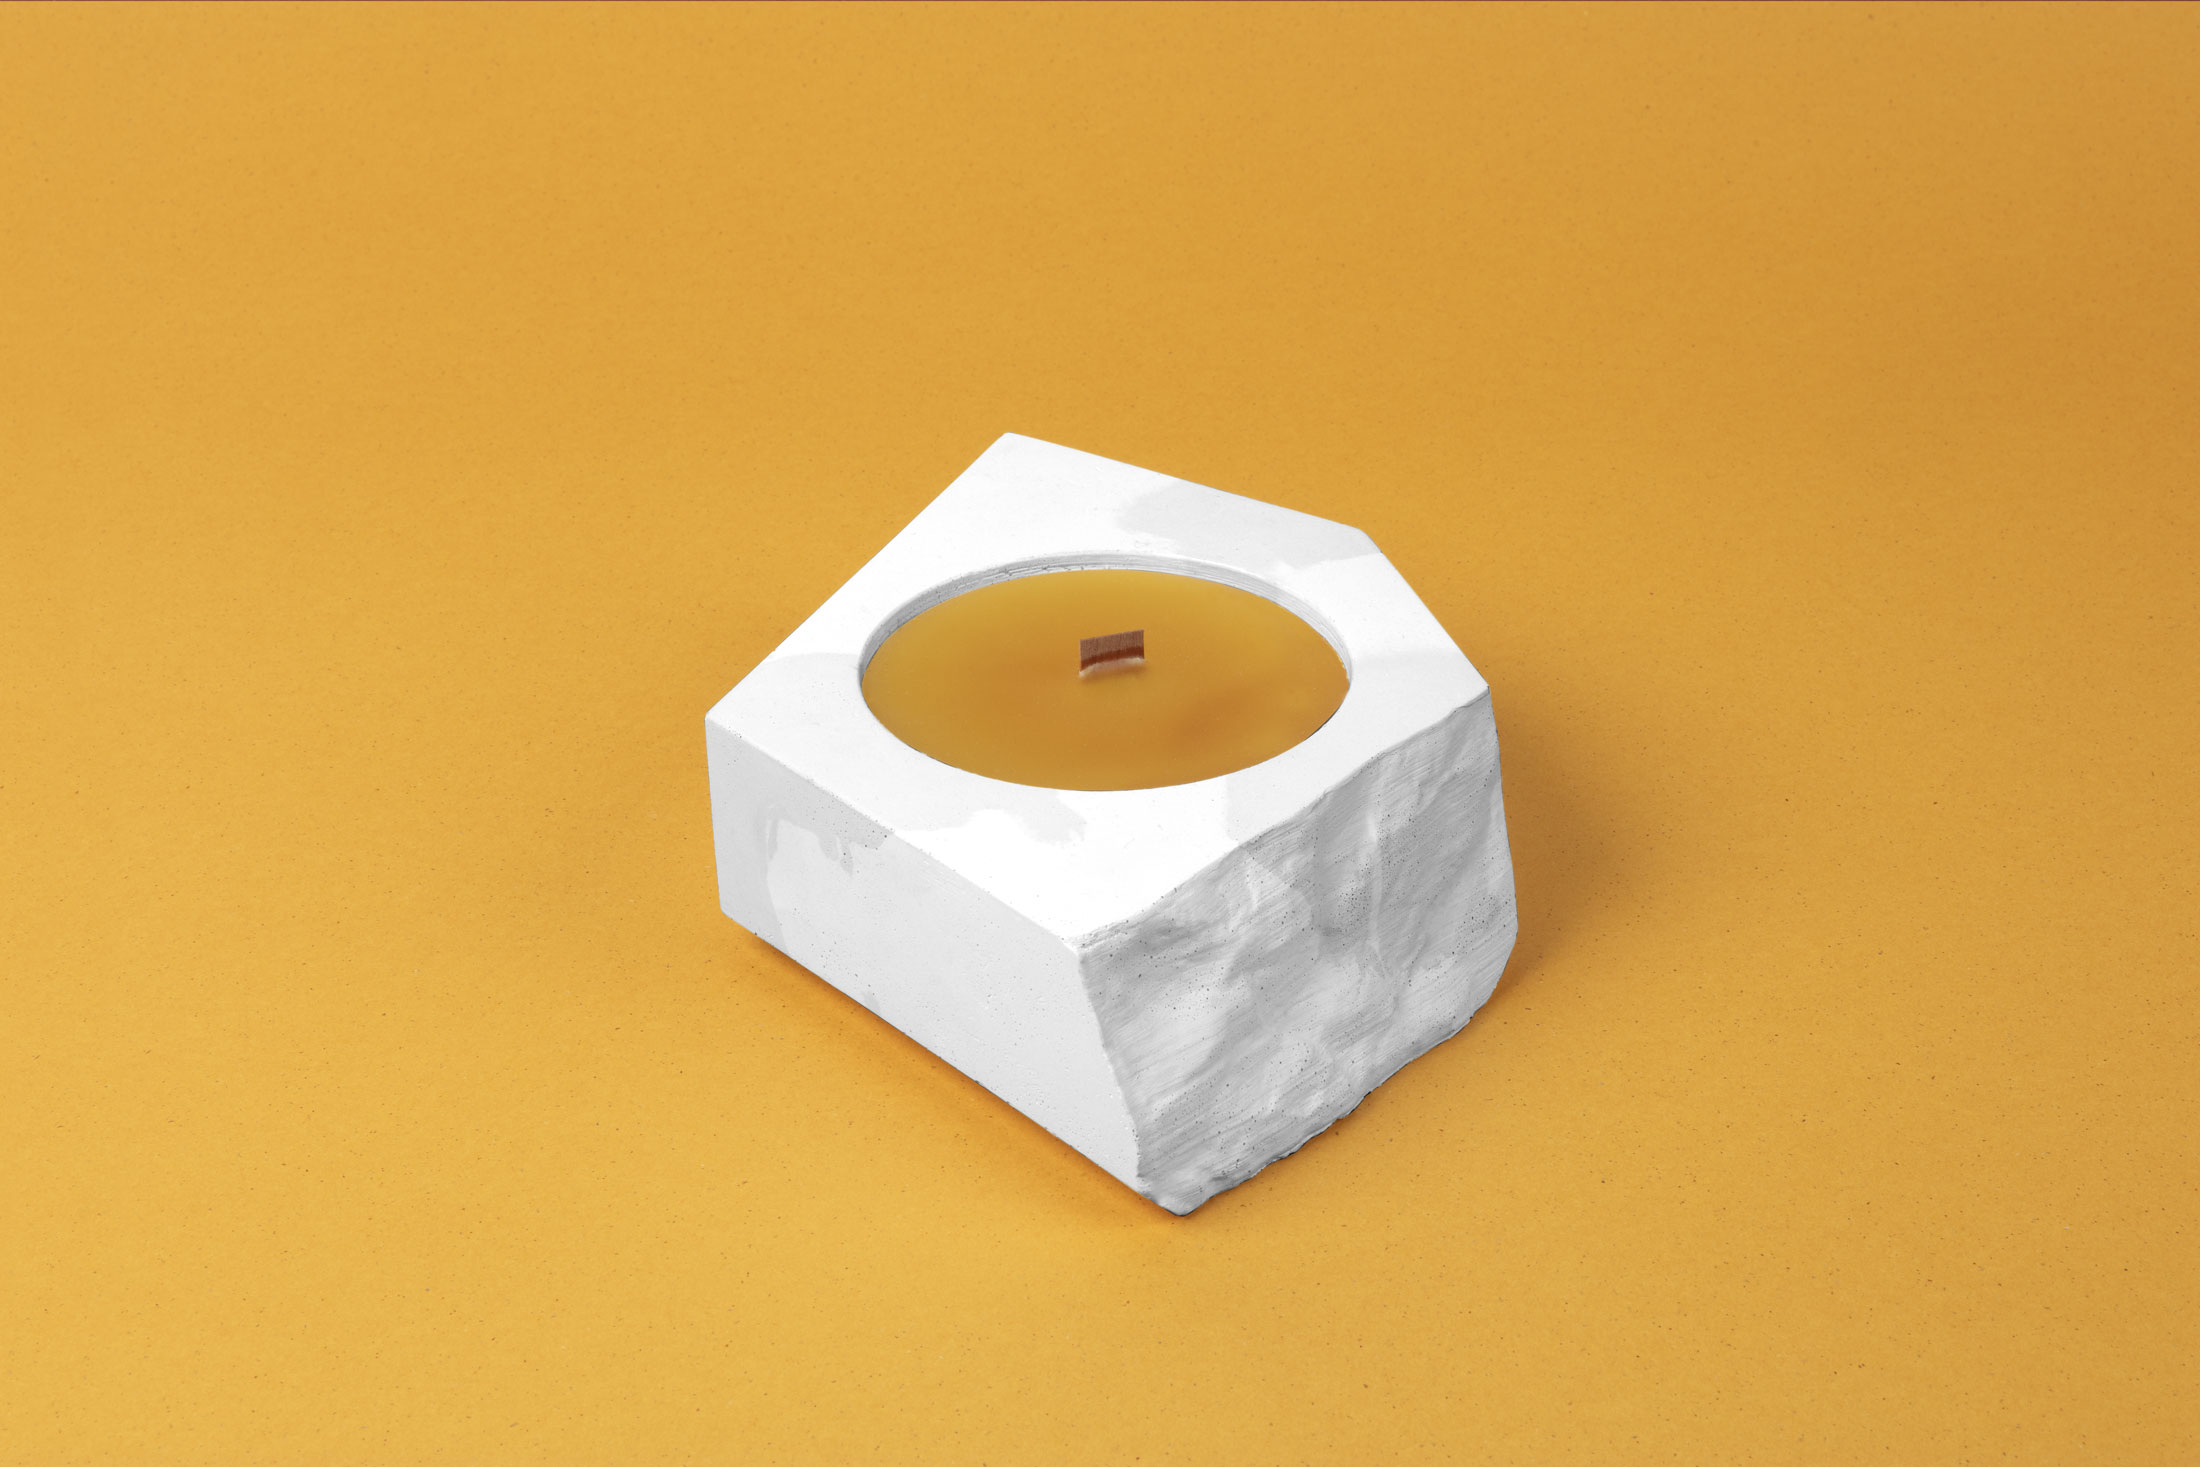 06-concrete-candle-recycled-noreste-1